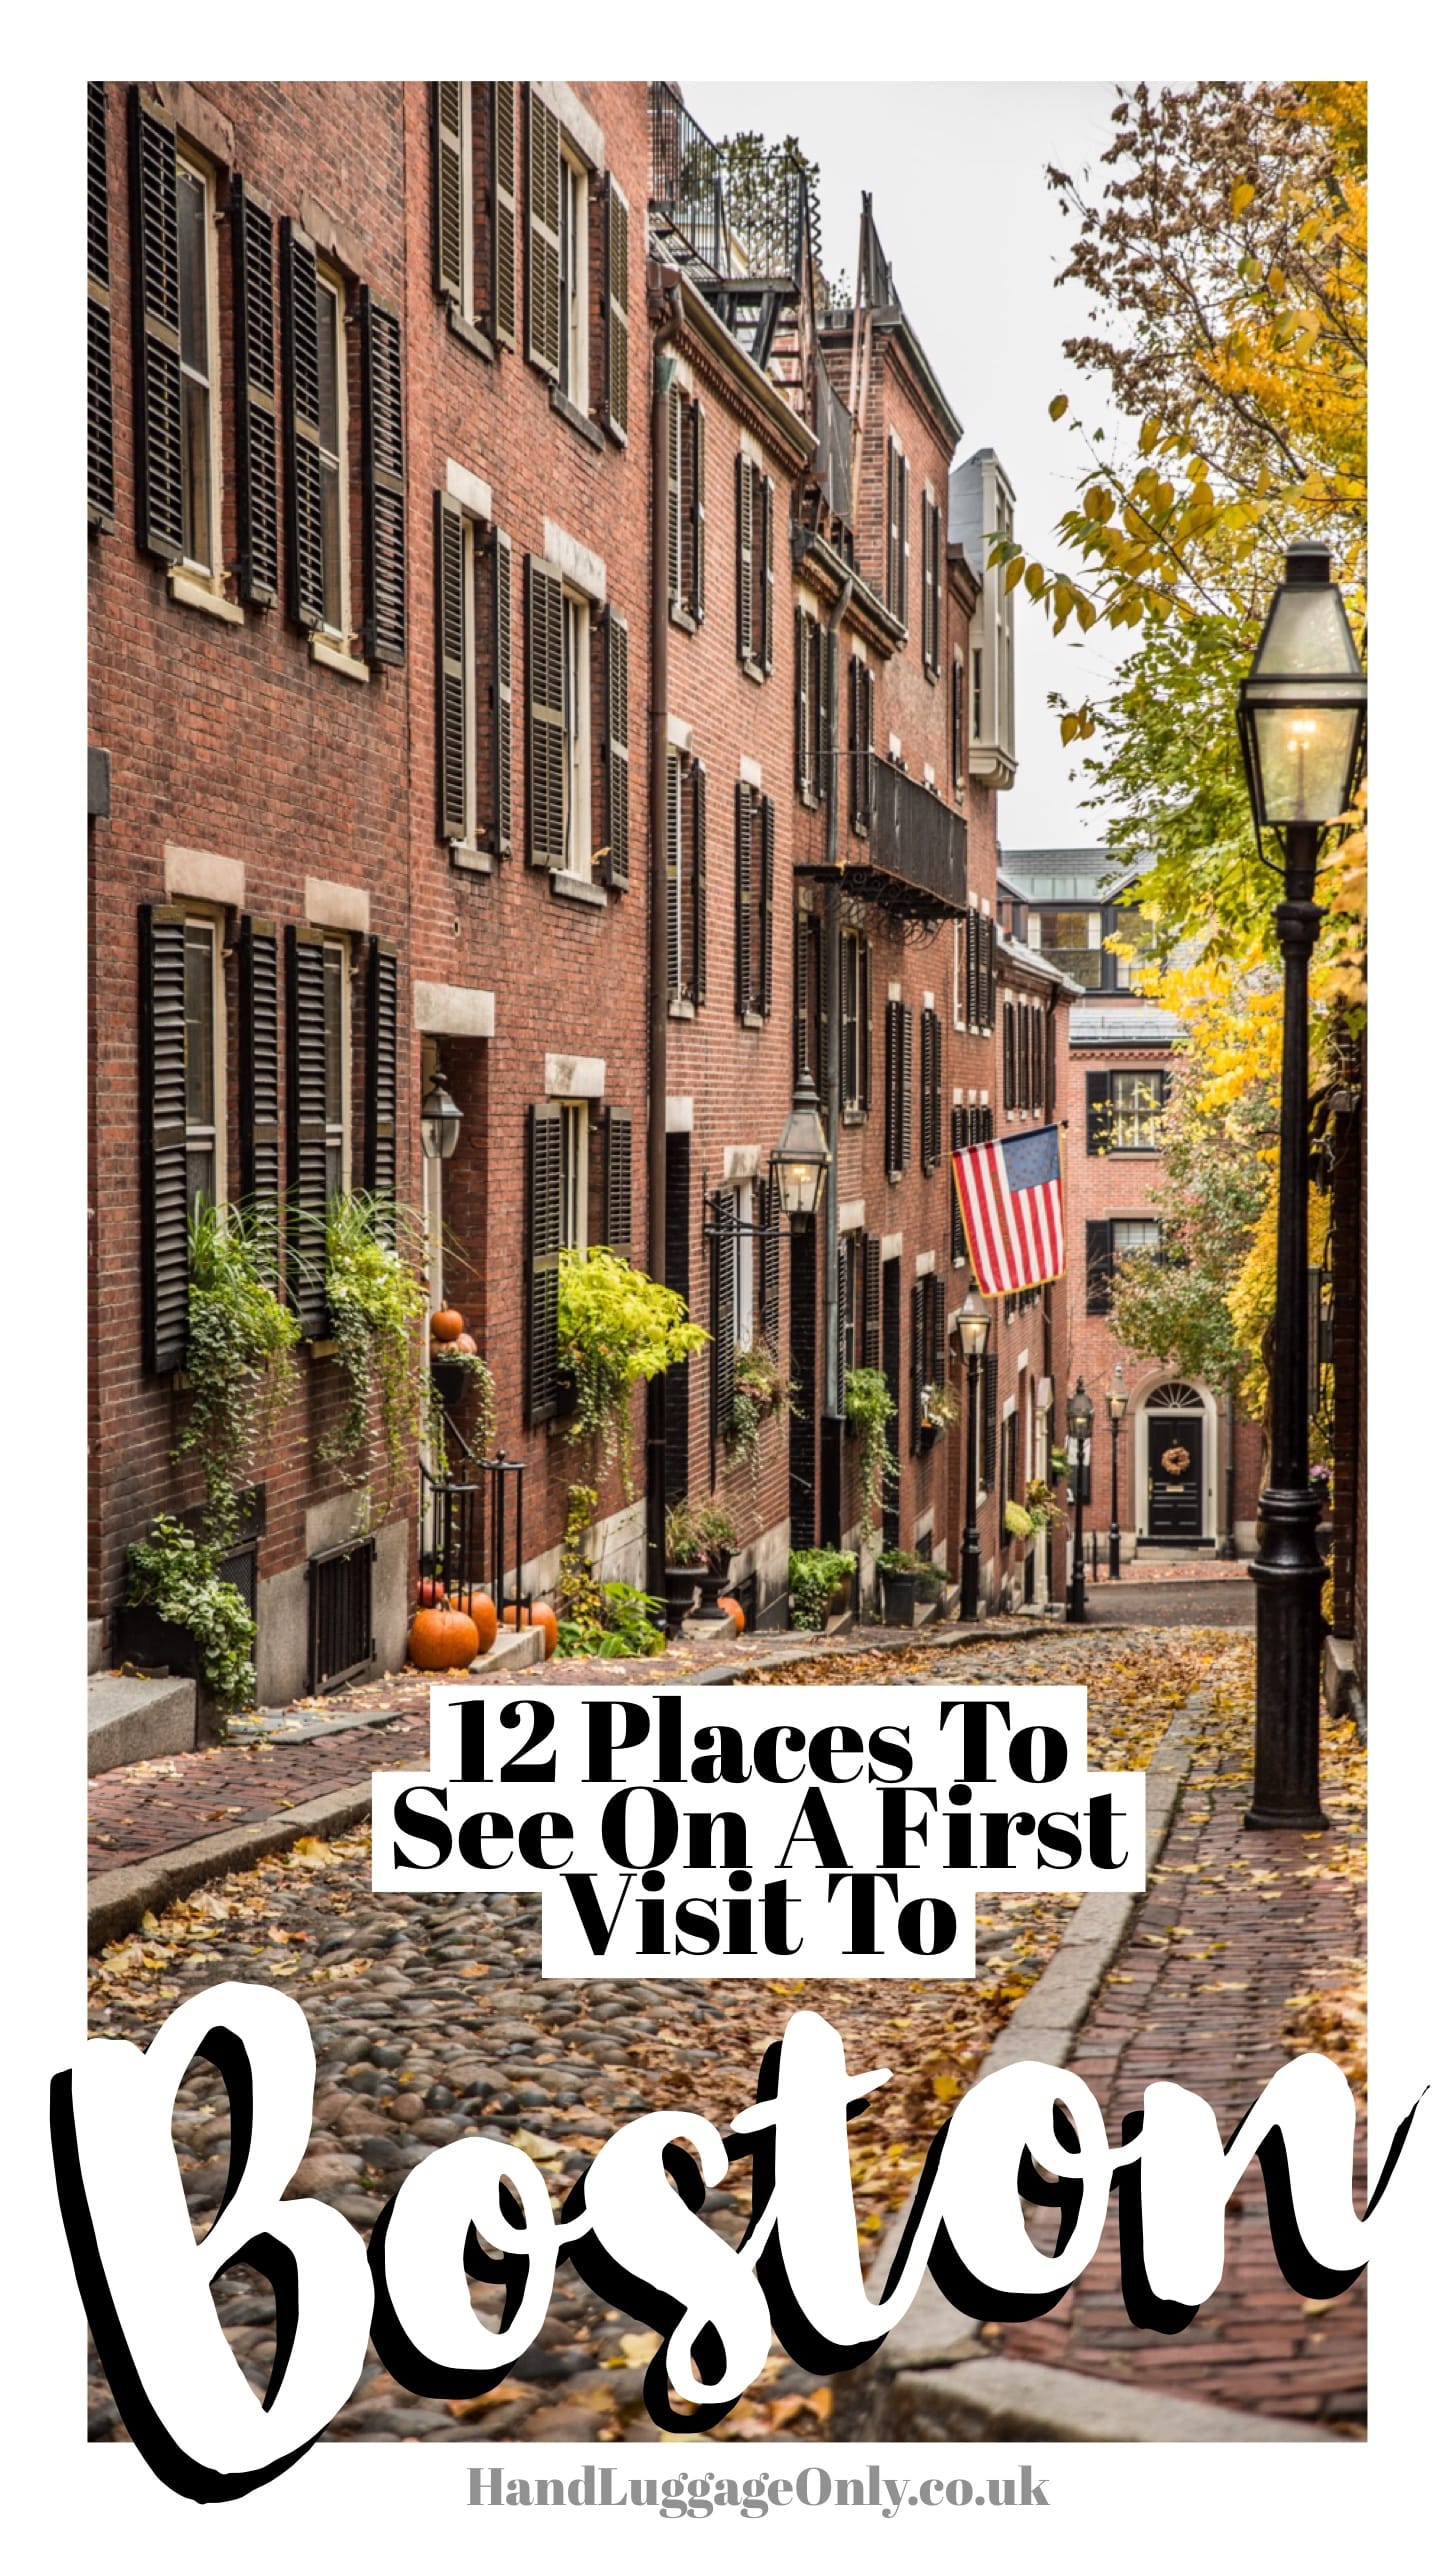 things to do in boston